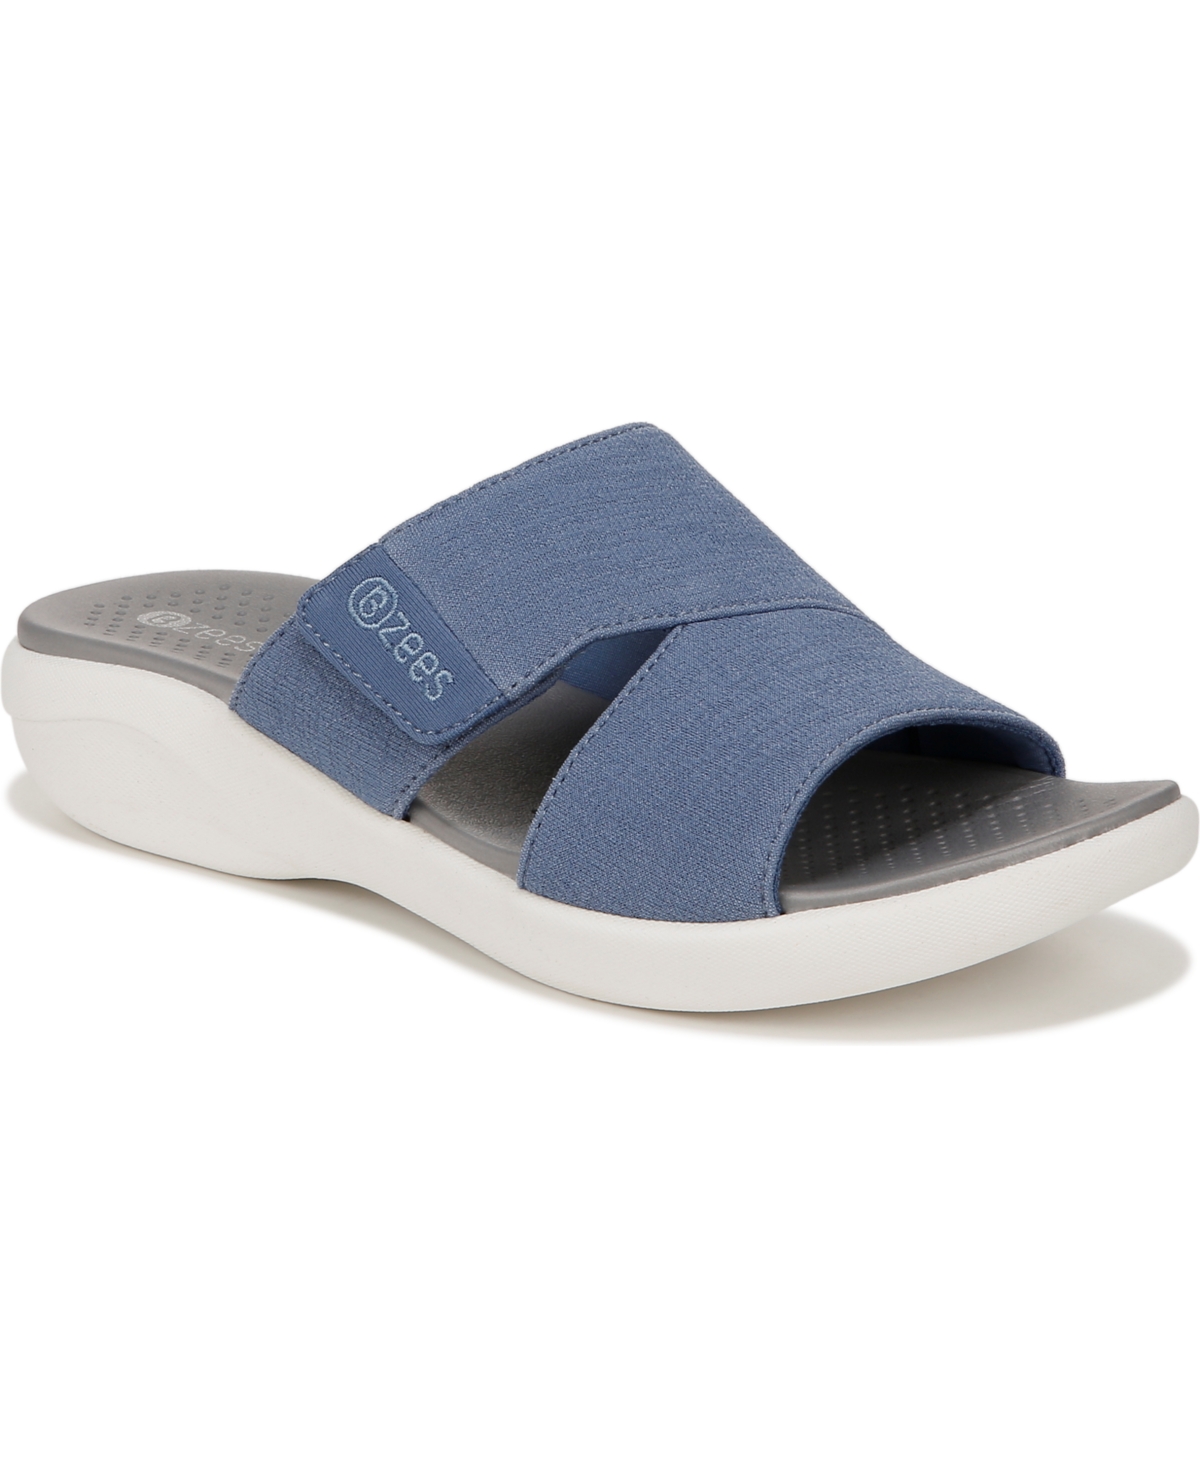 Bzees Carefree Washable Slide Sandals In Blue Fabric